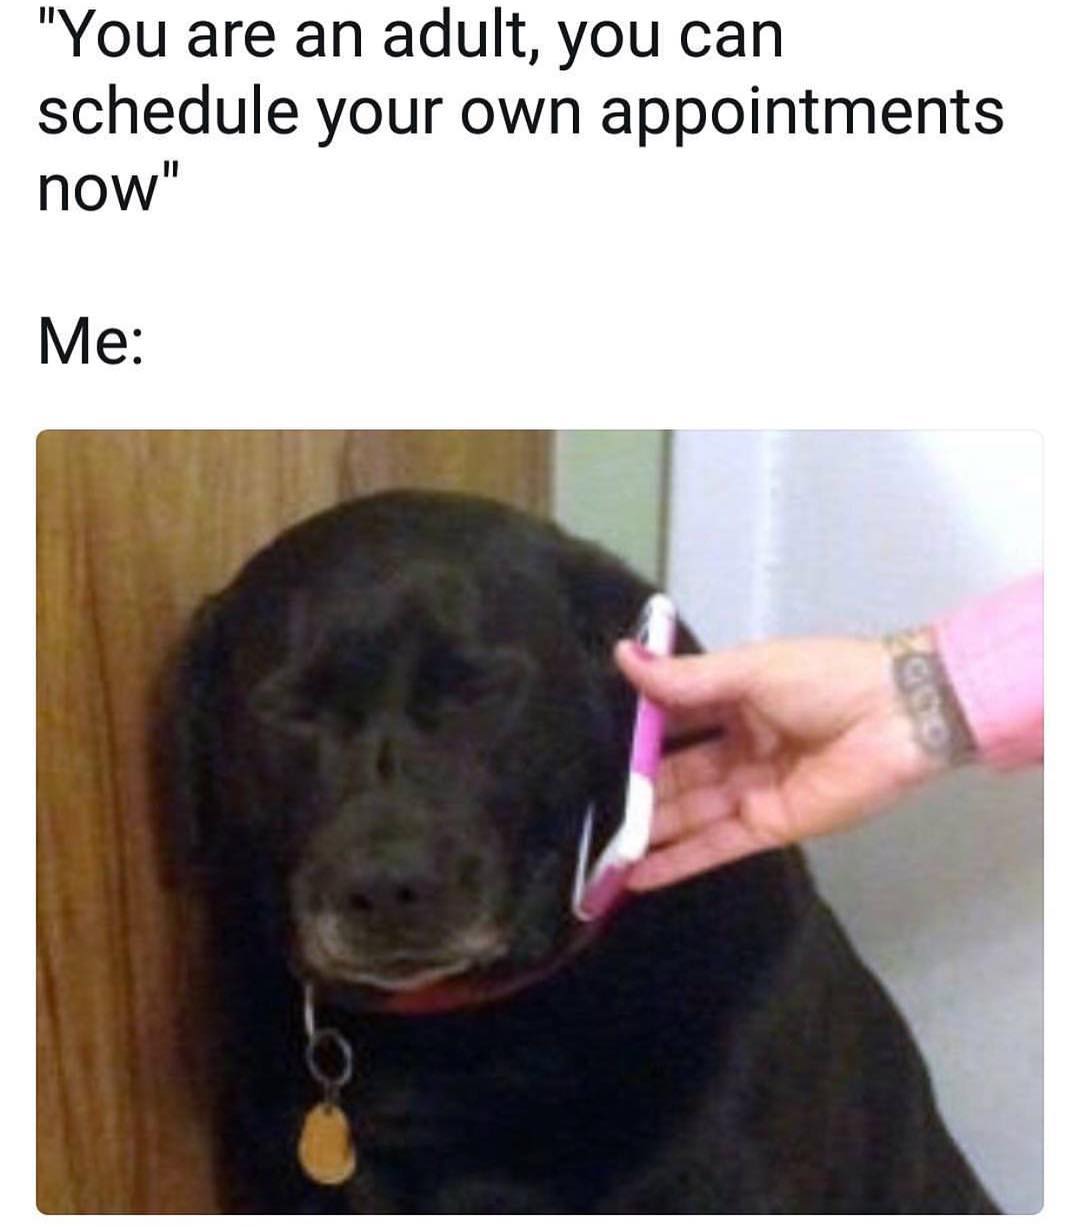 "You are an adult, you can schedule your own appointments now". Me: